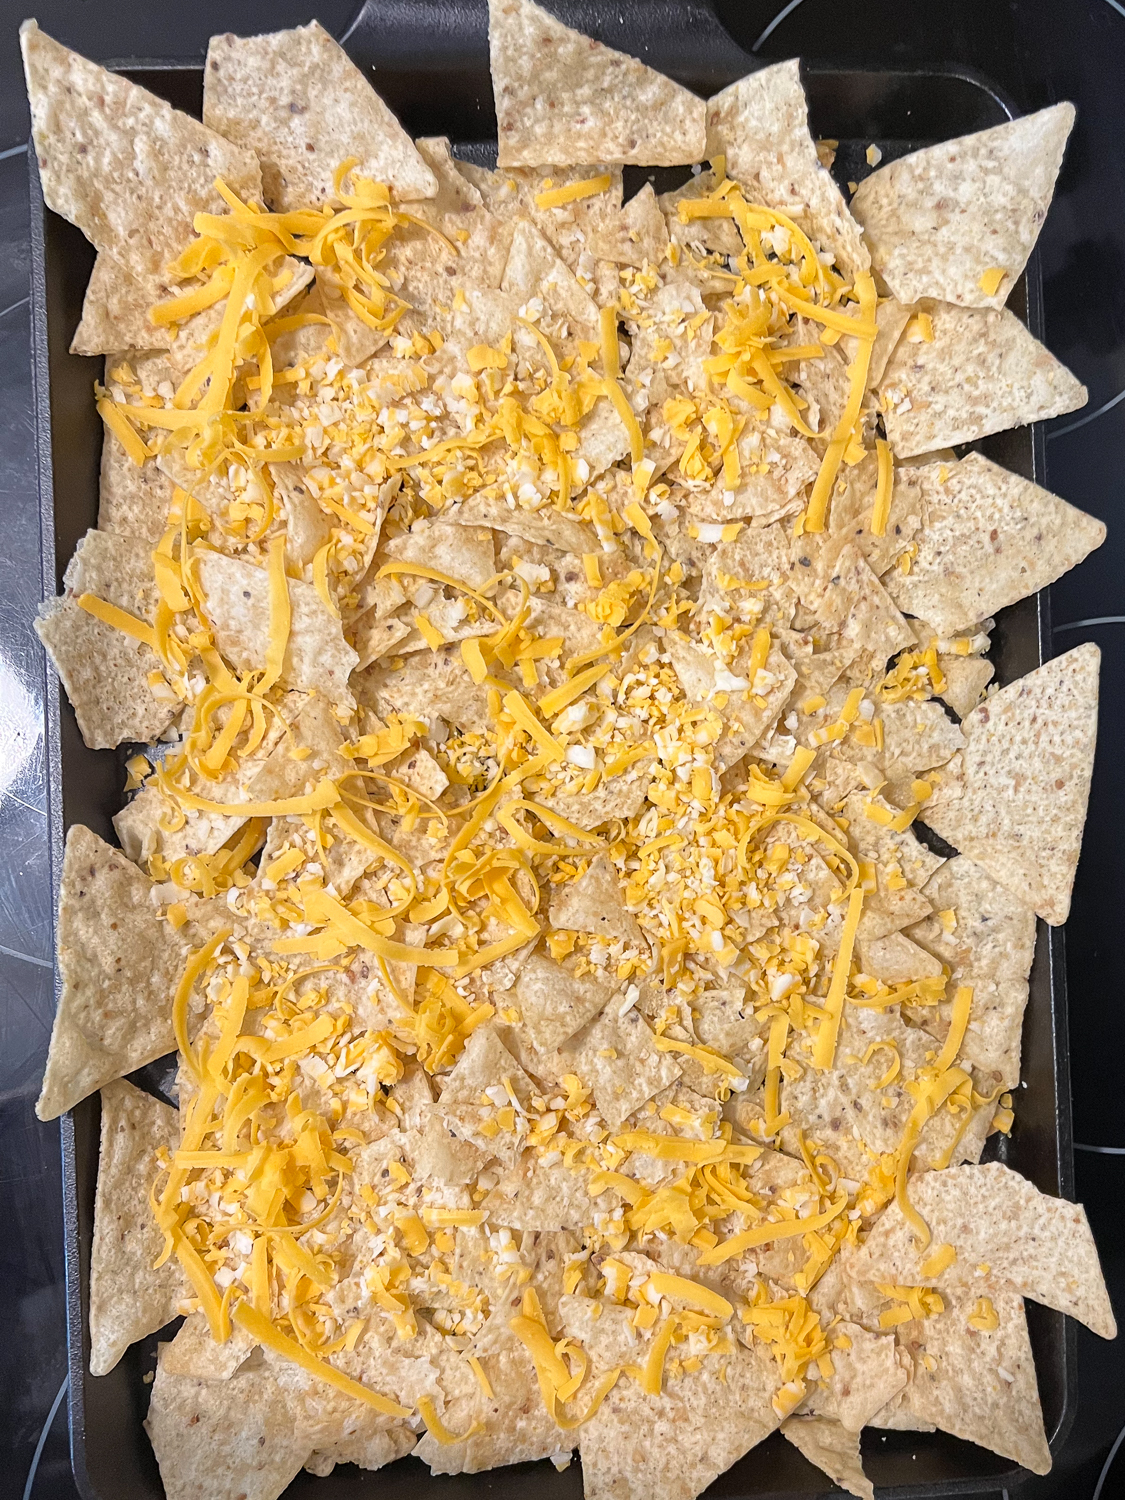 A thin layer of shreded cheese sprinkled over the tortilla chips.